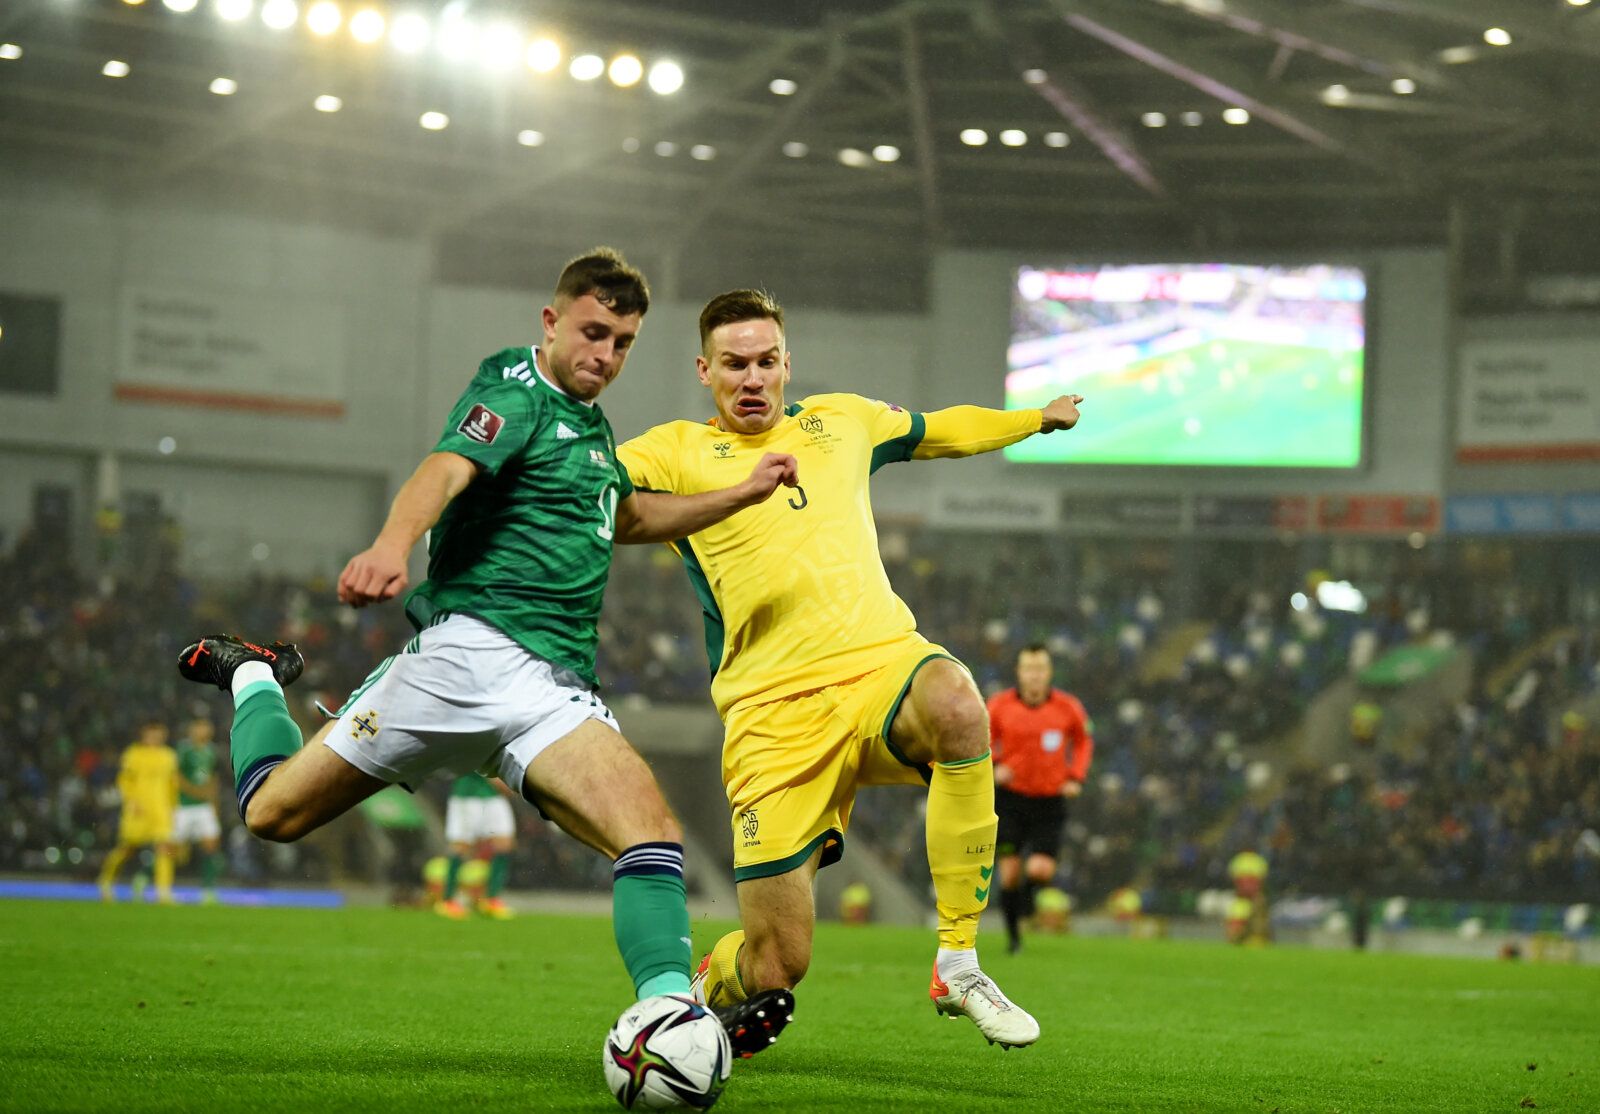 Soccer Football - World Cup - UEFA Qualifiers - Group C - Northern Ireland v Lithuania - Windsor Park, Belfast, Northern Ireland - November 12, 2021 Northern Ireland's Dale Taylor in action with Lithuania's Vytas Gaspuitis REUTERS/Clodagh Kilcoyne